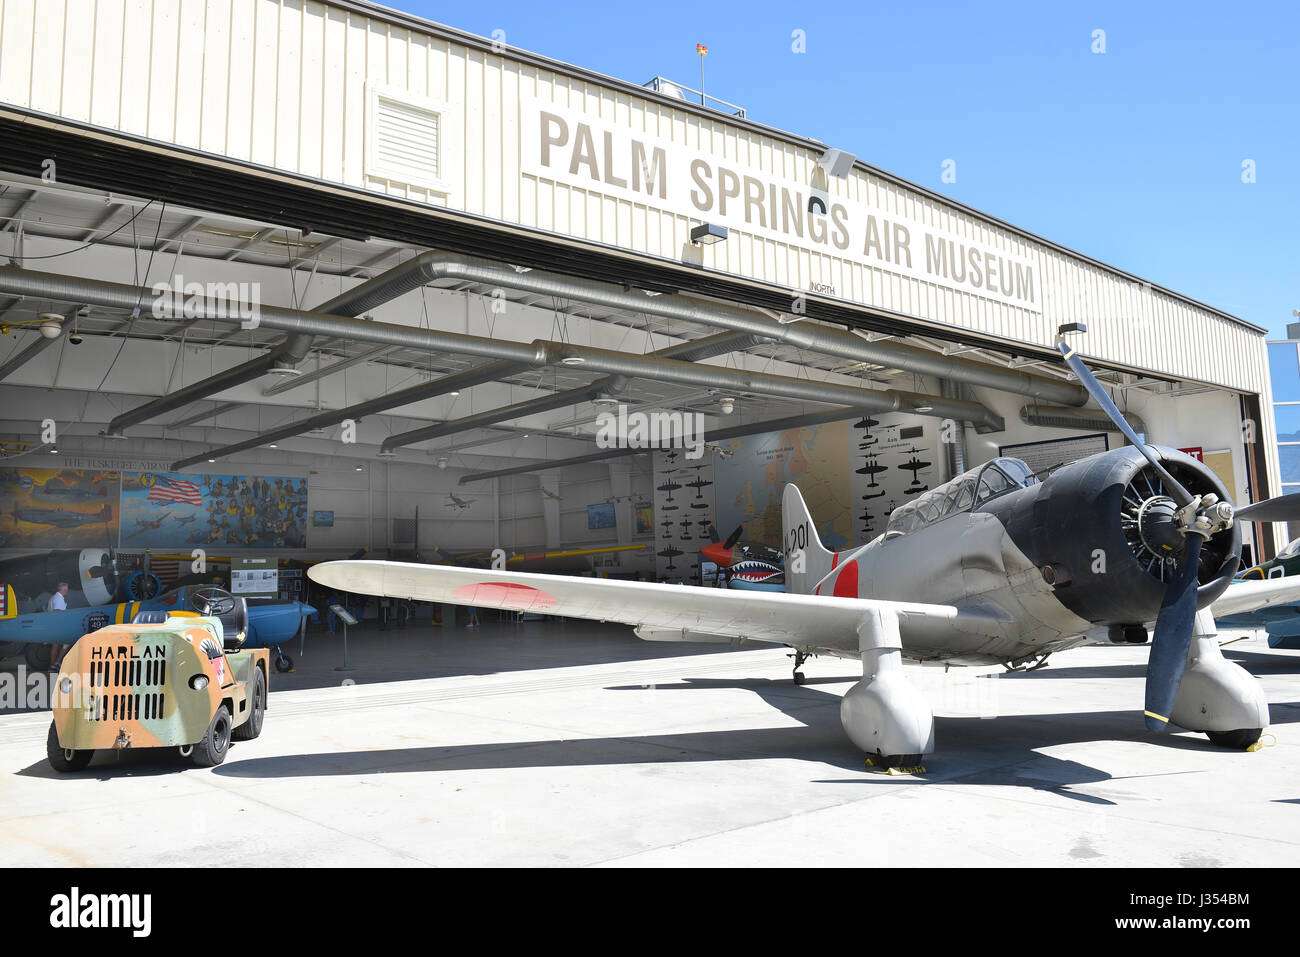 Hangar and vintage plane at the Palm Springs Air Museum. Stock Photo